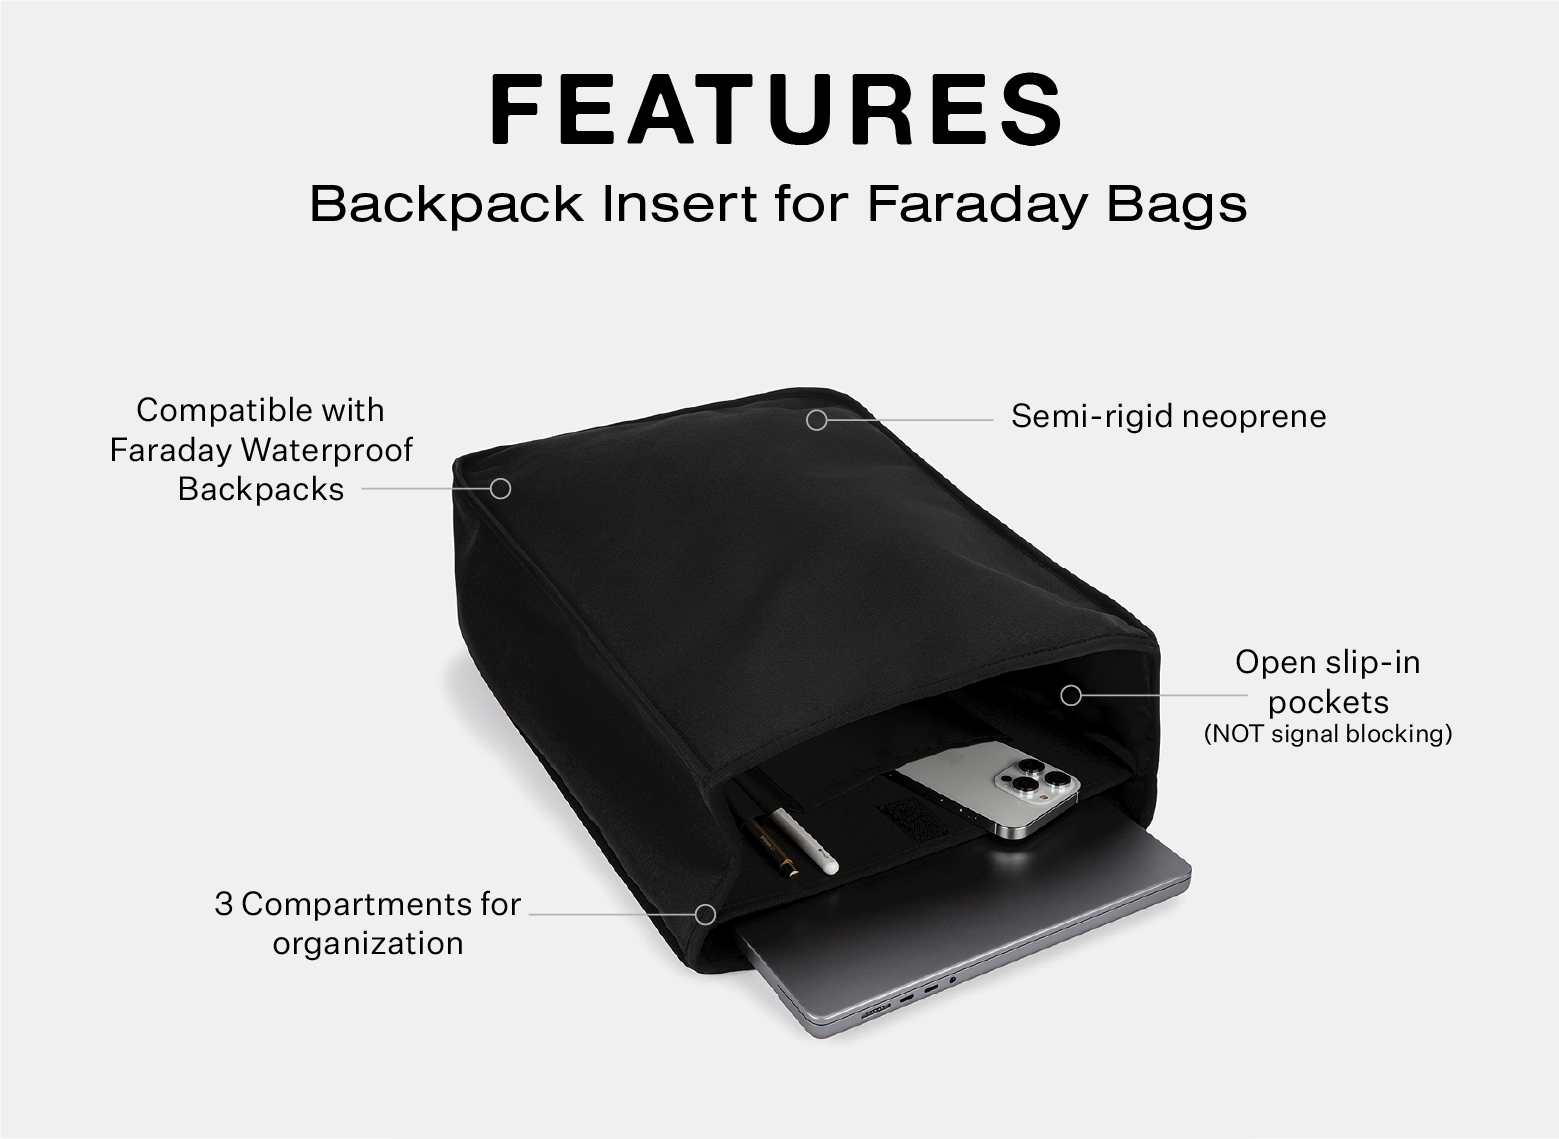 Backpack Insert for Faraday Bags